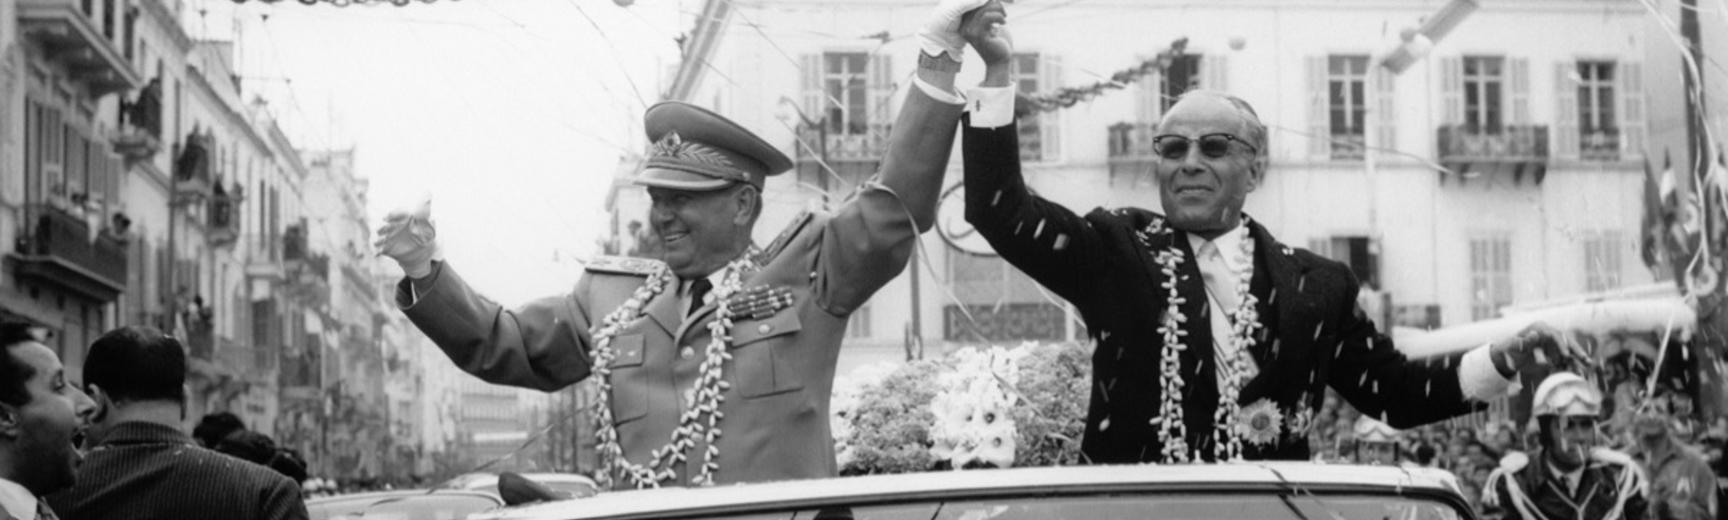 Tunisia, 1961. Presidents Tito and Bourguiba on the way from the harbour to the residence in Tunisia.